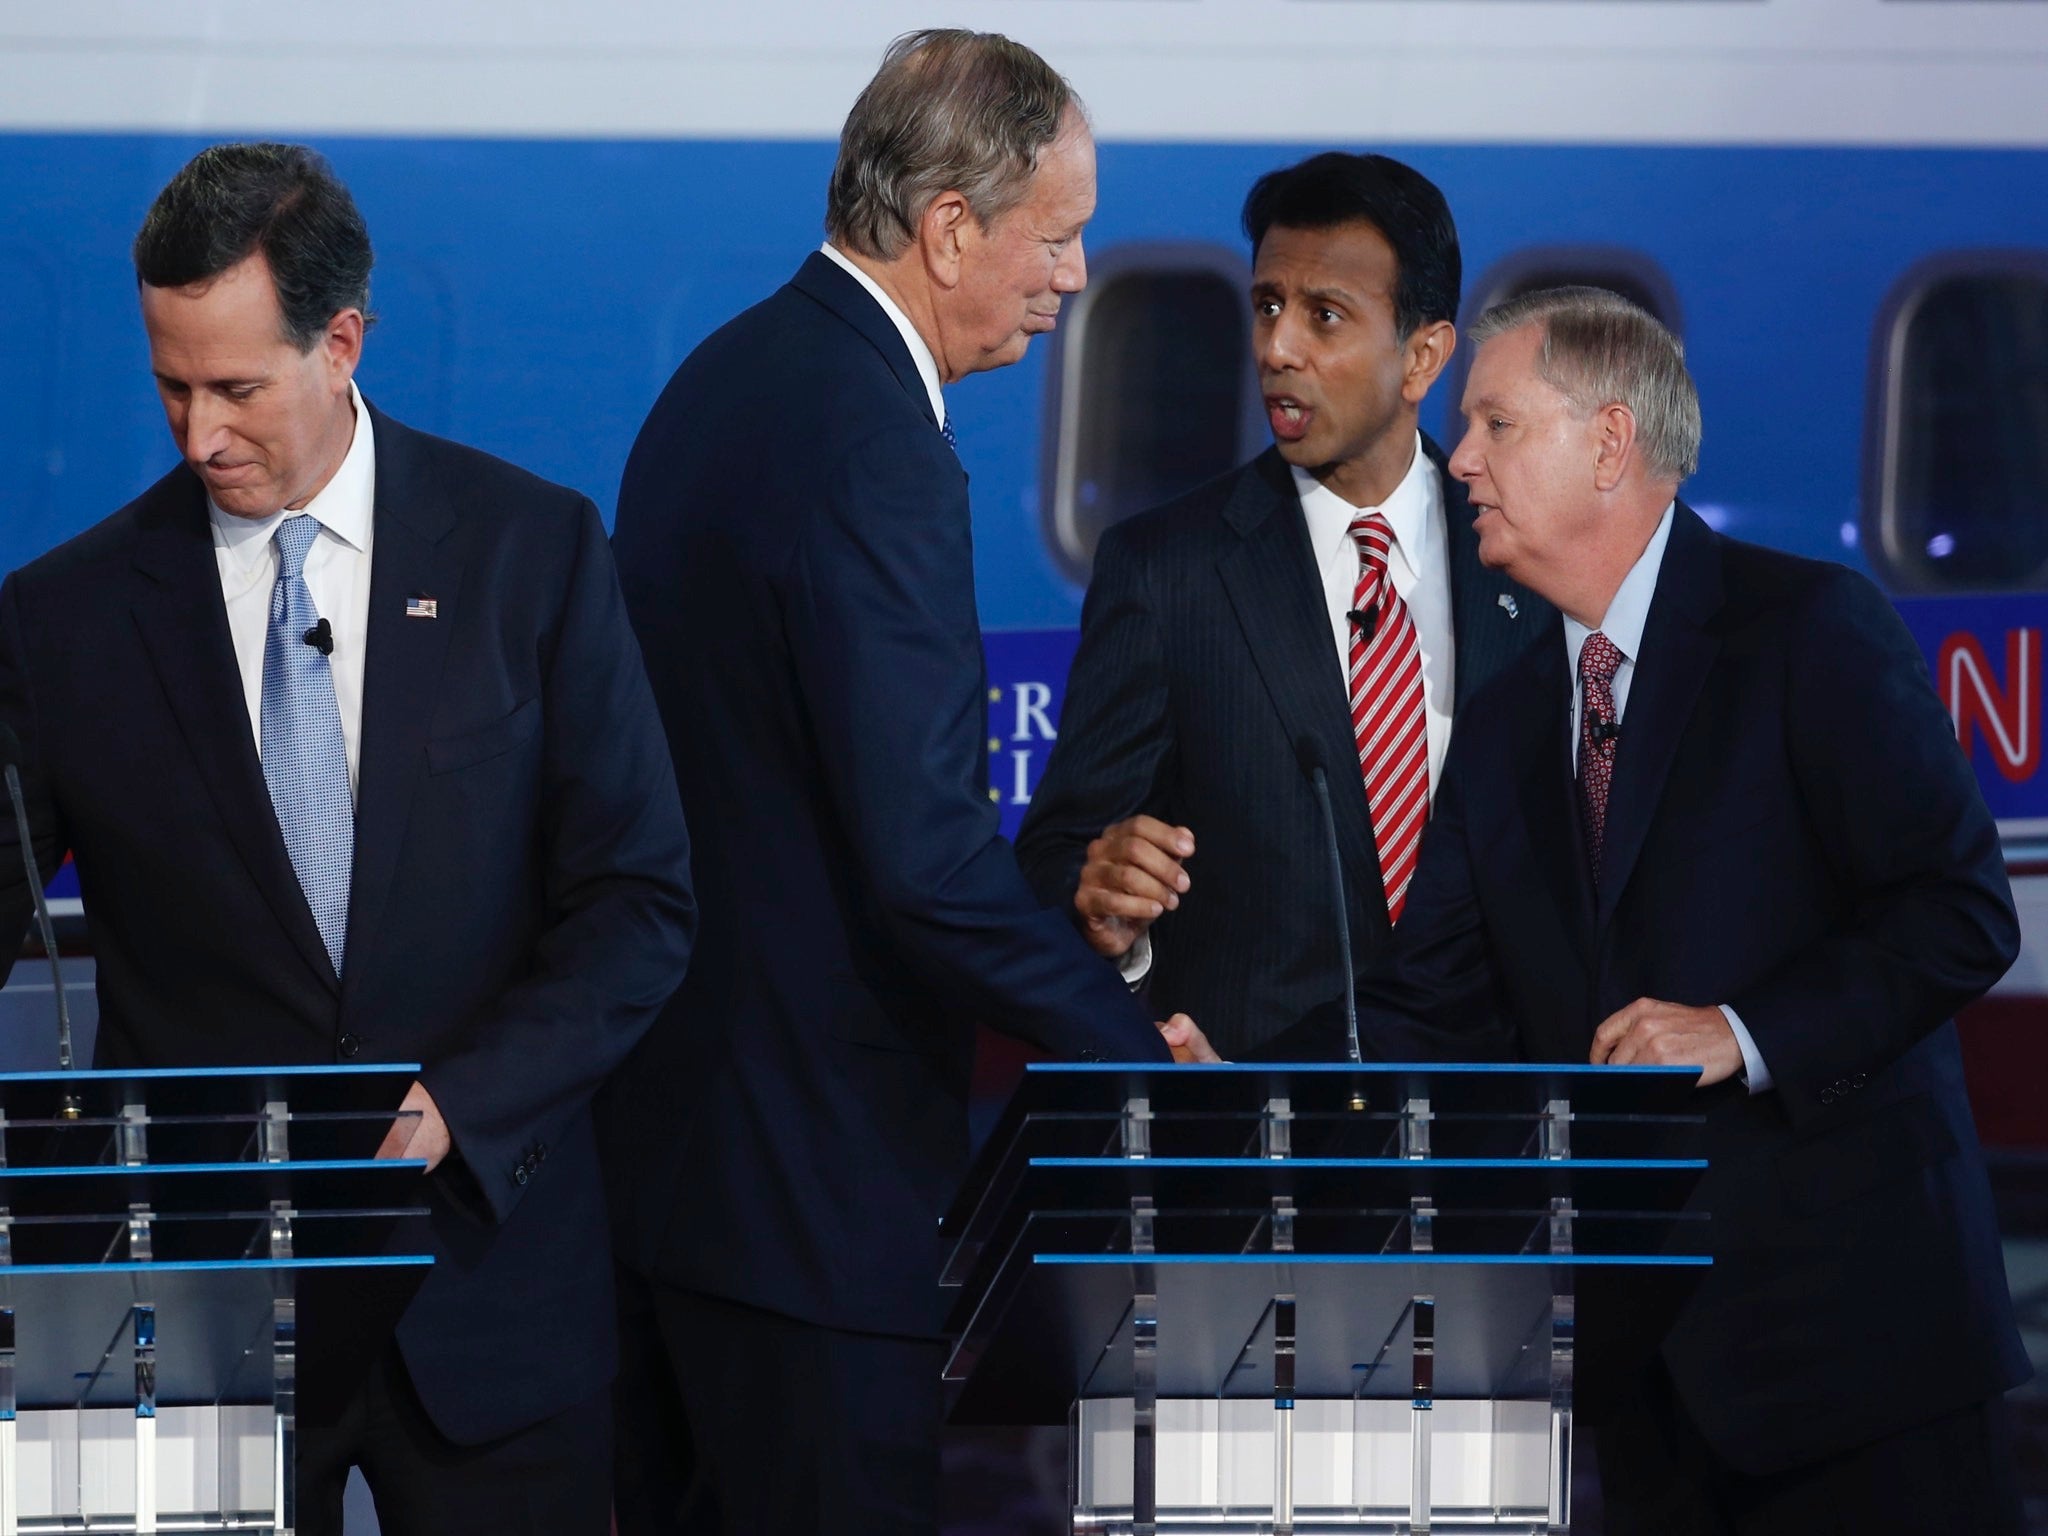 The four candidates in the first debate